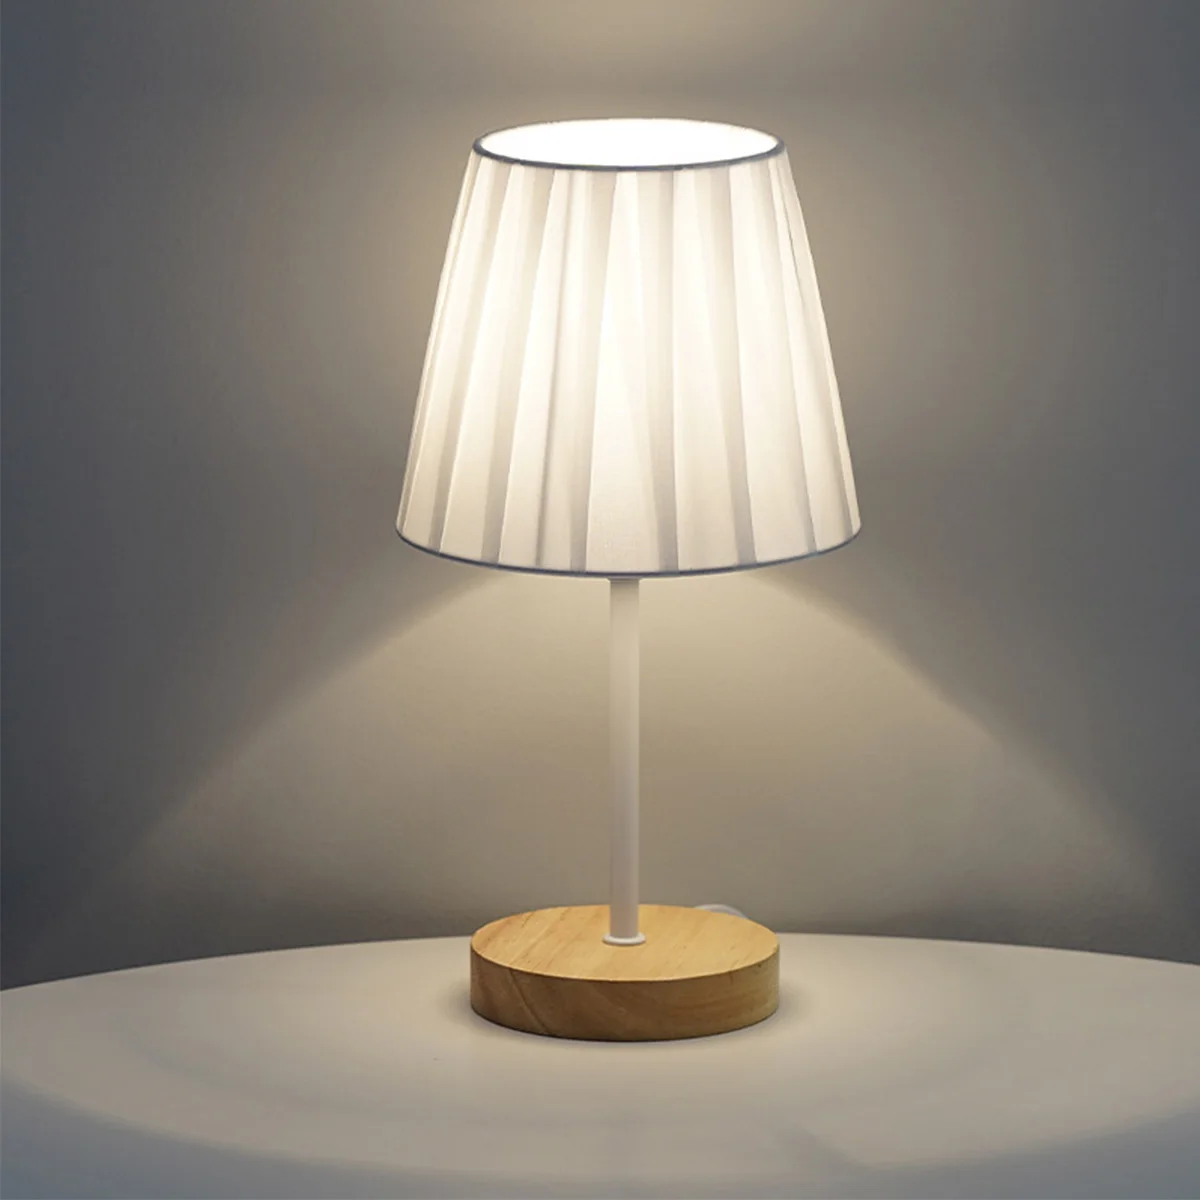 Wooden Table Lamp Night Light USB Powered Nightstand Lamp Bedside Lamp With - $23.40+